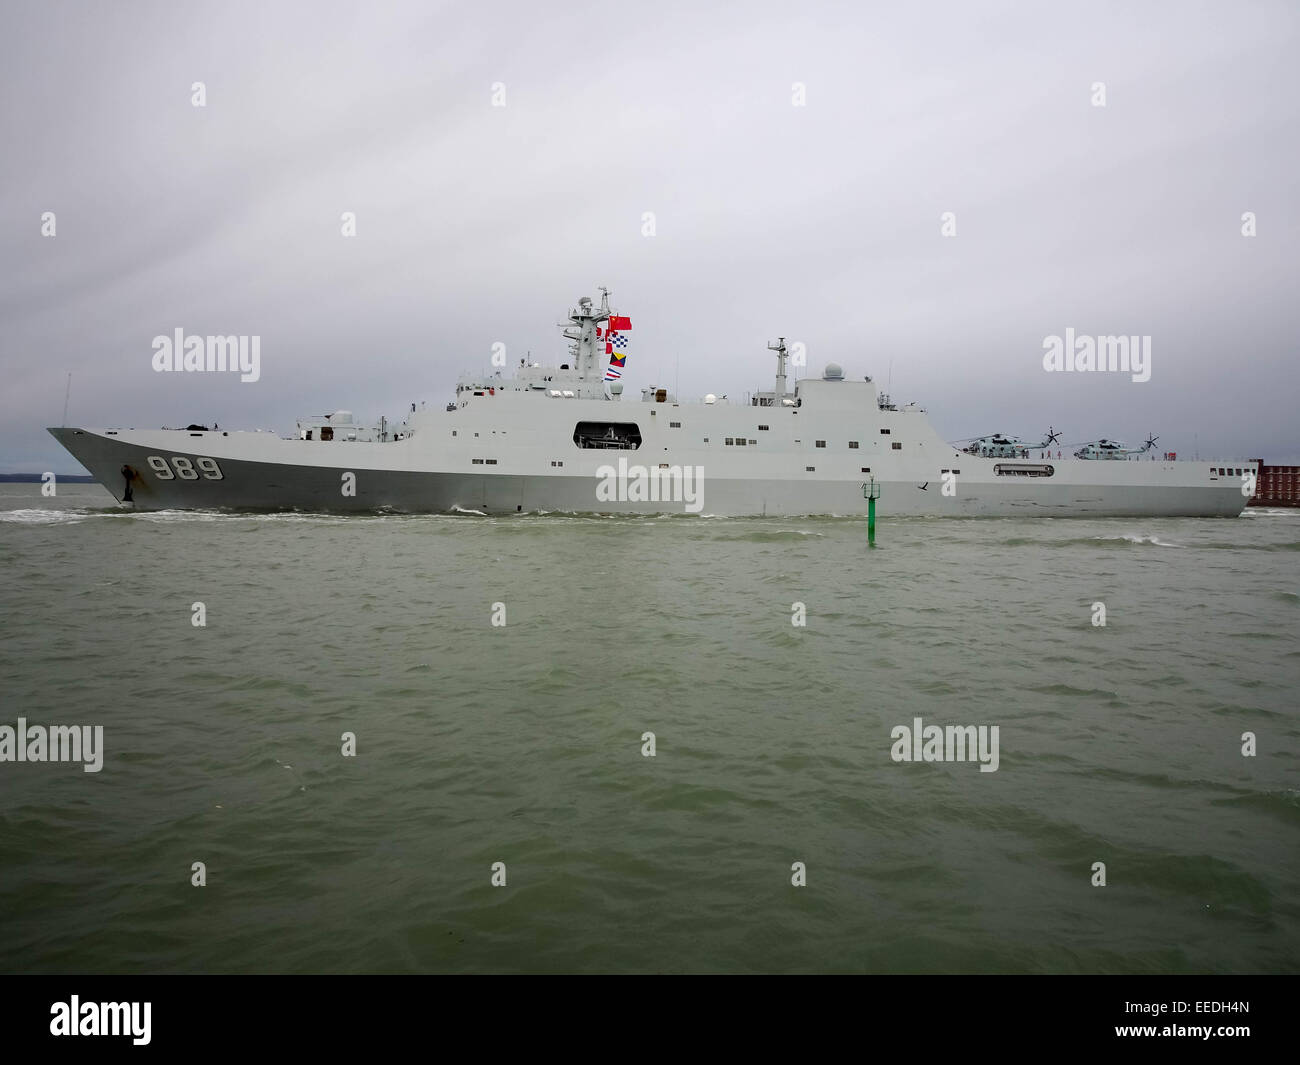 Portsmouth, England, 16th January 2015. assault ship Chang Bai Shan of the People's Liberation Army (Navy) leaves Portsmouth Harbour after a 5 day visit aimed at enhancing military understanding between the UK and China. The assault ship Chang Bai Shan was accompanied by the frigate Yun Cheng  and the replenishment ship Chaohu. Credit:  simon evans/Alamy Live News Stock Photo